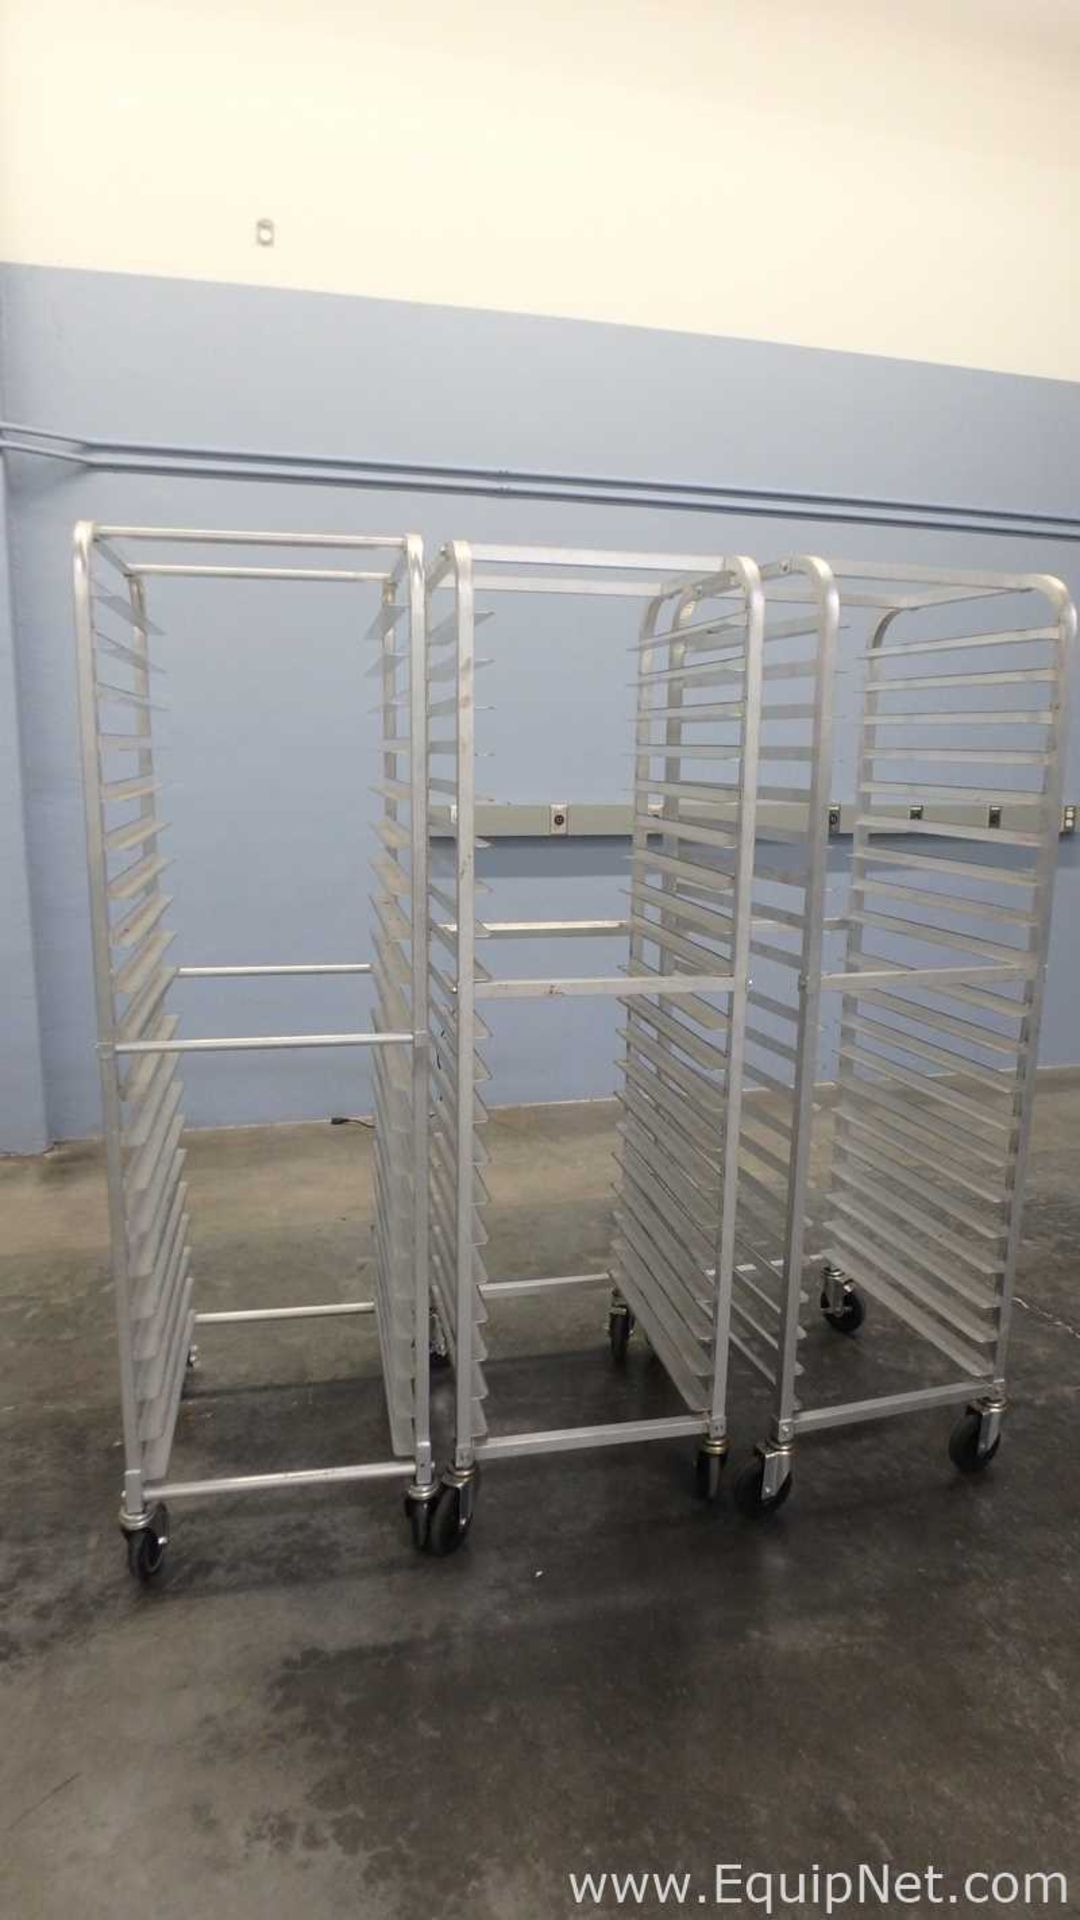 Lot of 3 Allstrong Mobile Pan Rack Full Height Open Sides with Slides for 20 18inx26in Pans